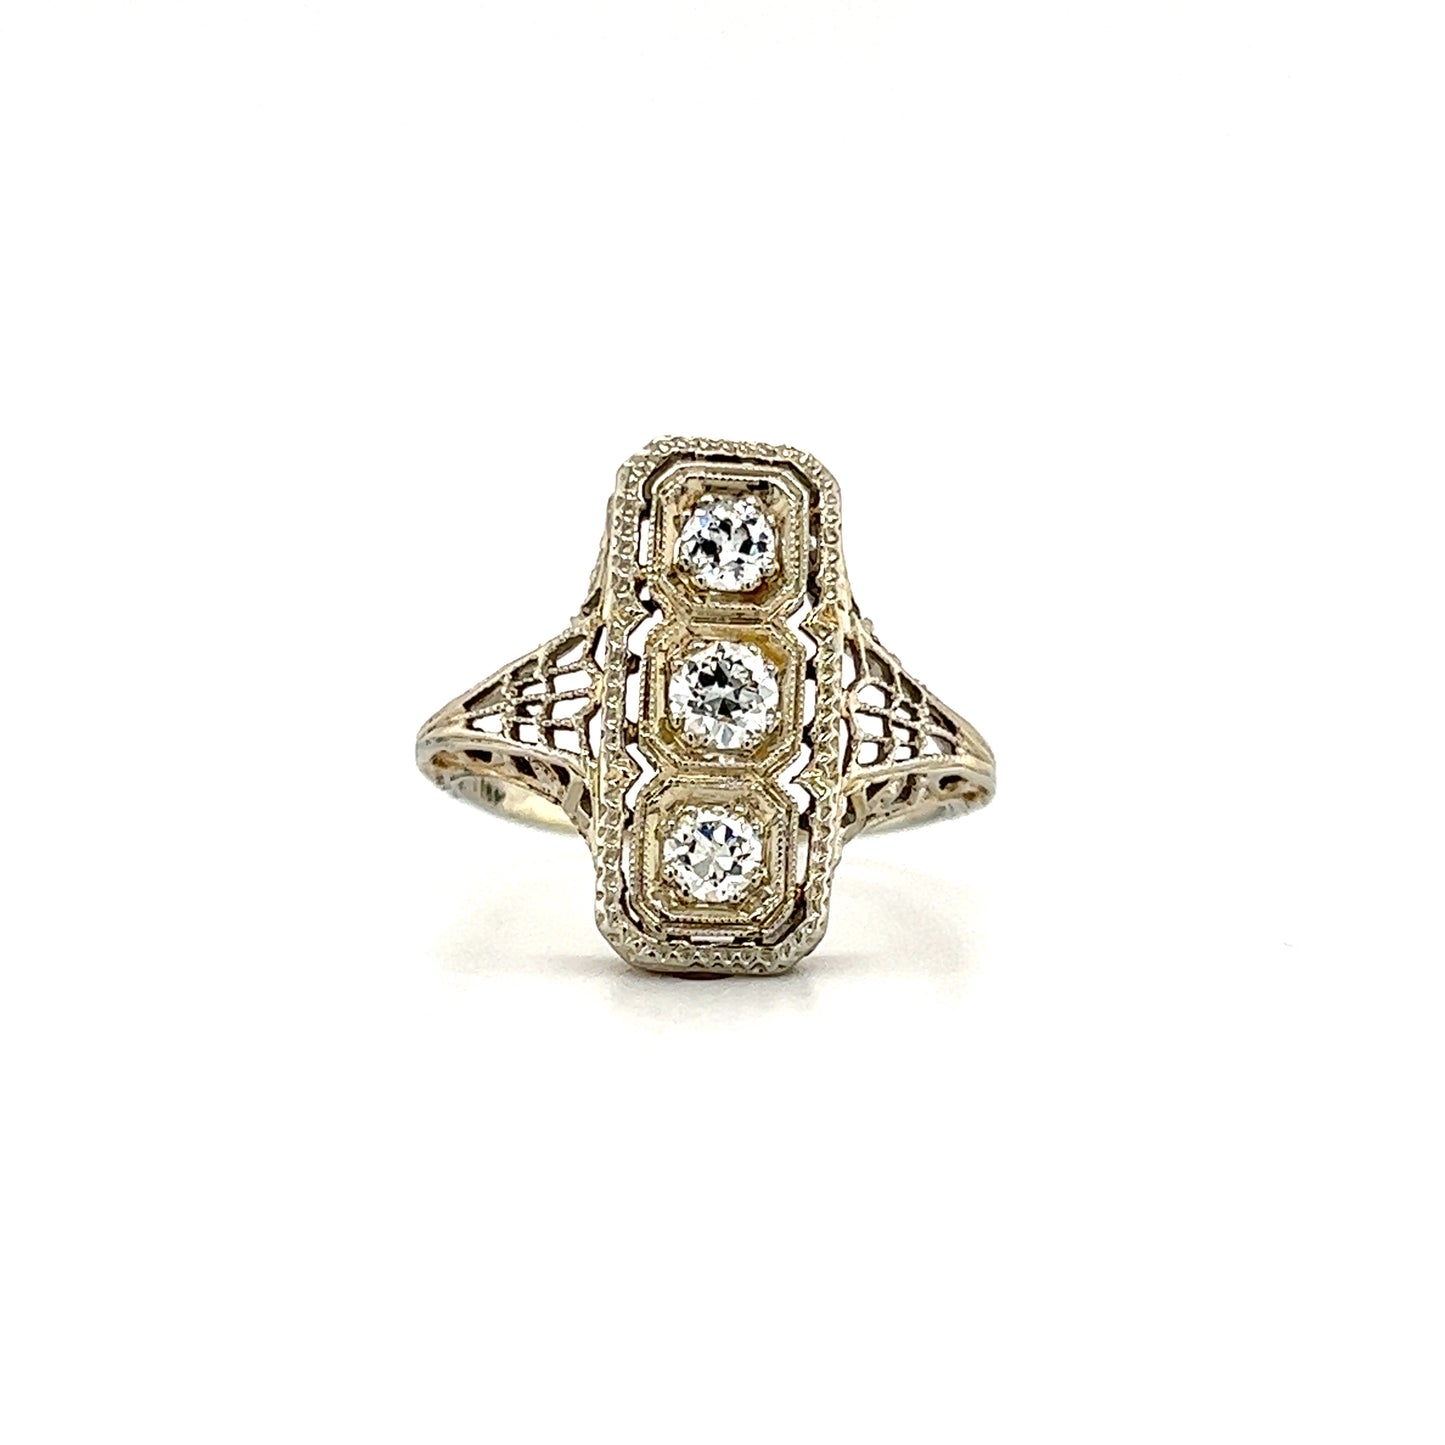 Rectangular Diamond Ring with Filigree and Milgrain in 18K White Gold Front View